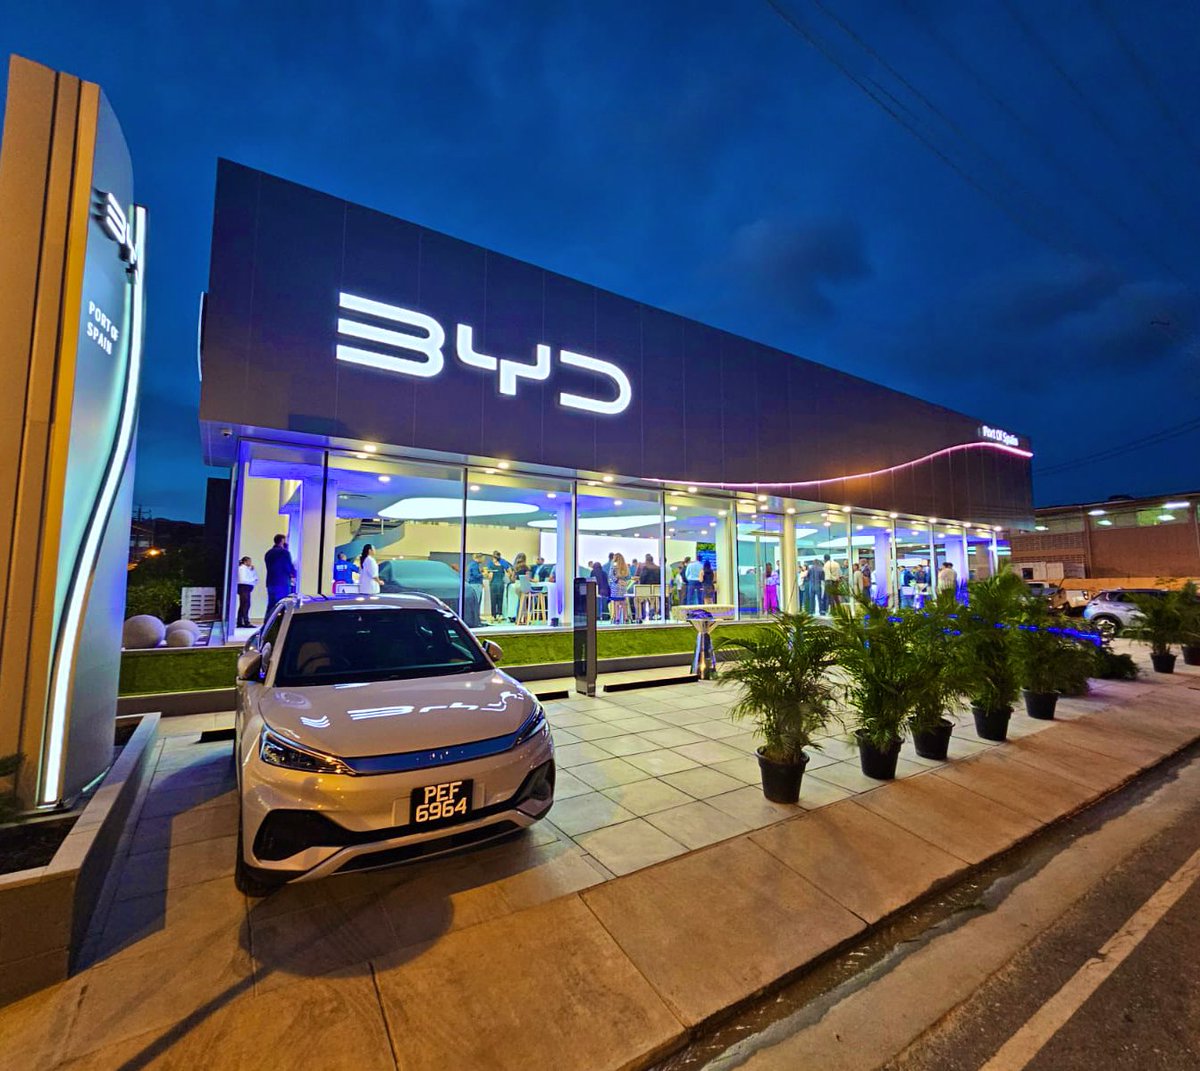 🇹🇹 BYD Trinidad is officially open. Congratulations to our amazing team & partners on another world class #Caribbean mobility investment. ⚡️@atlautomotive @BYDCompany ⚡️